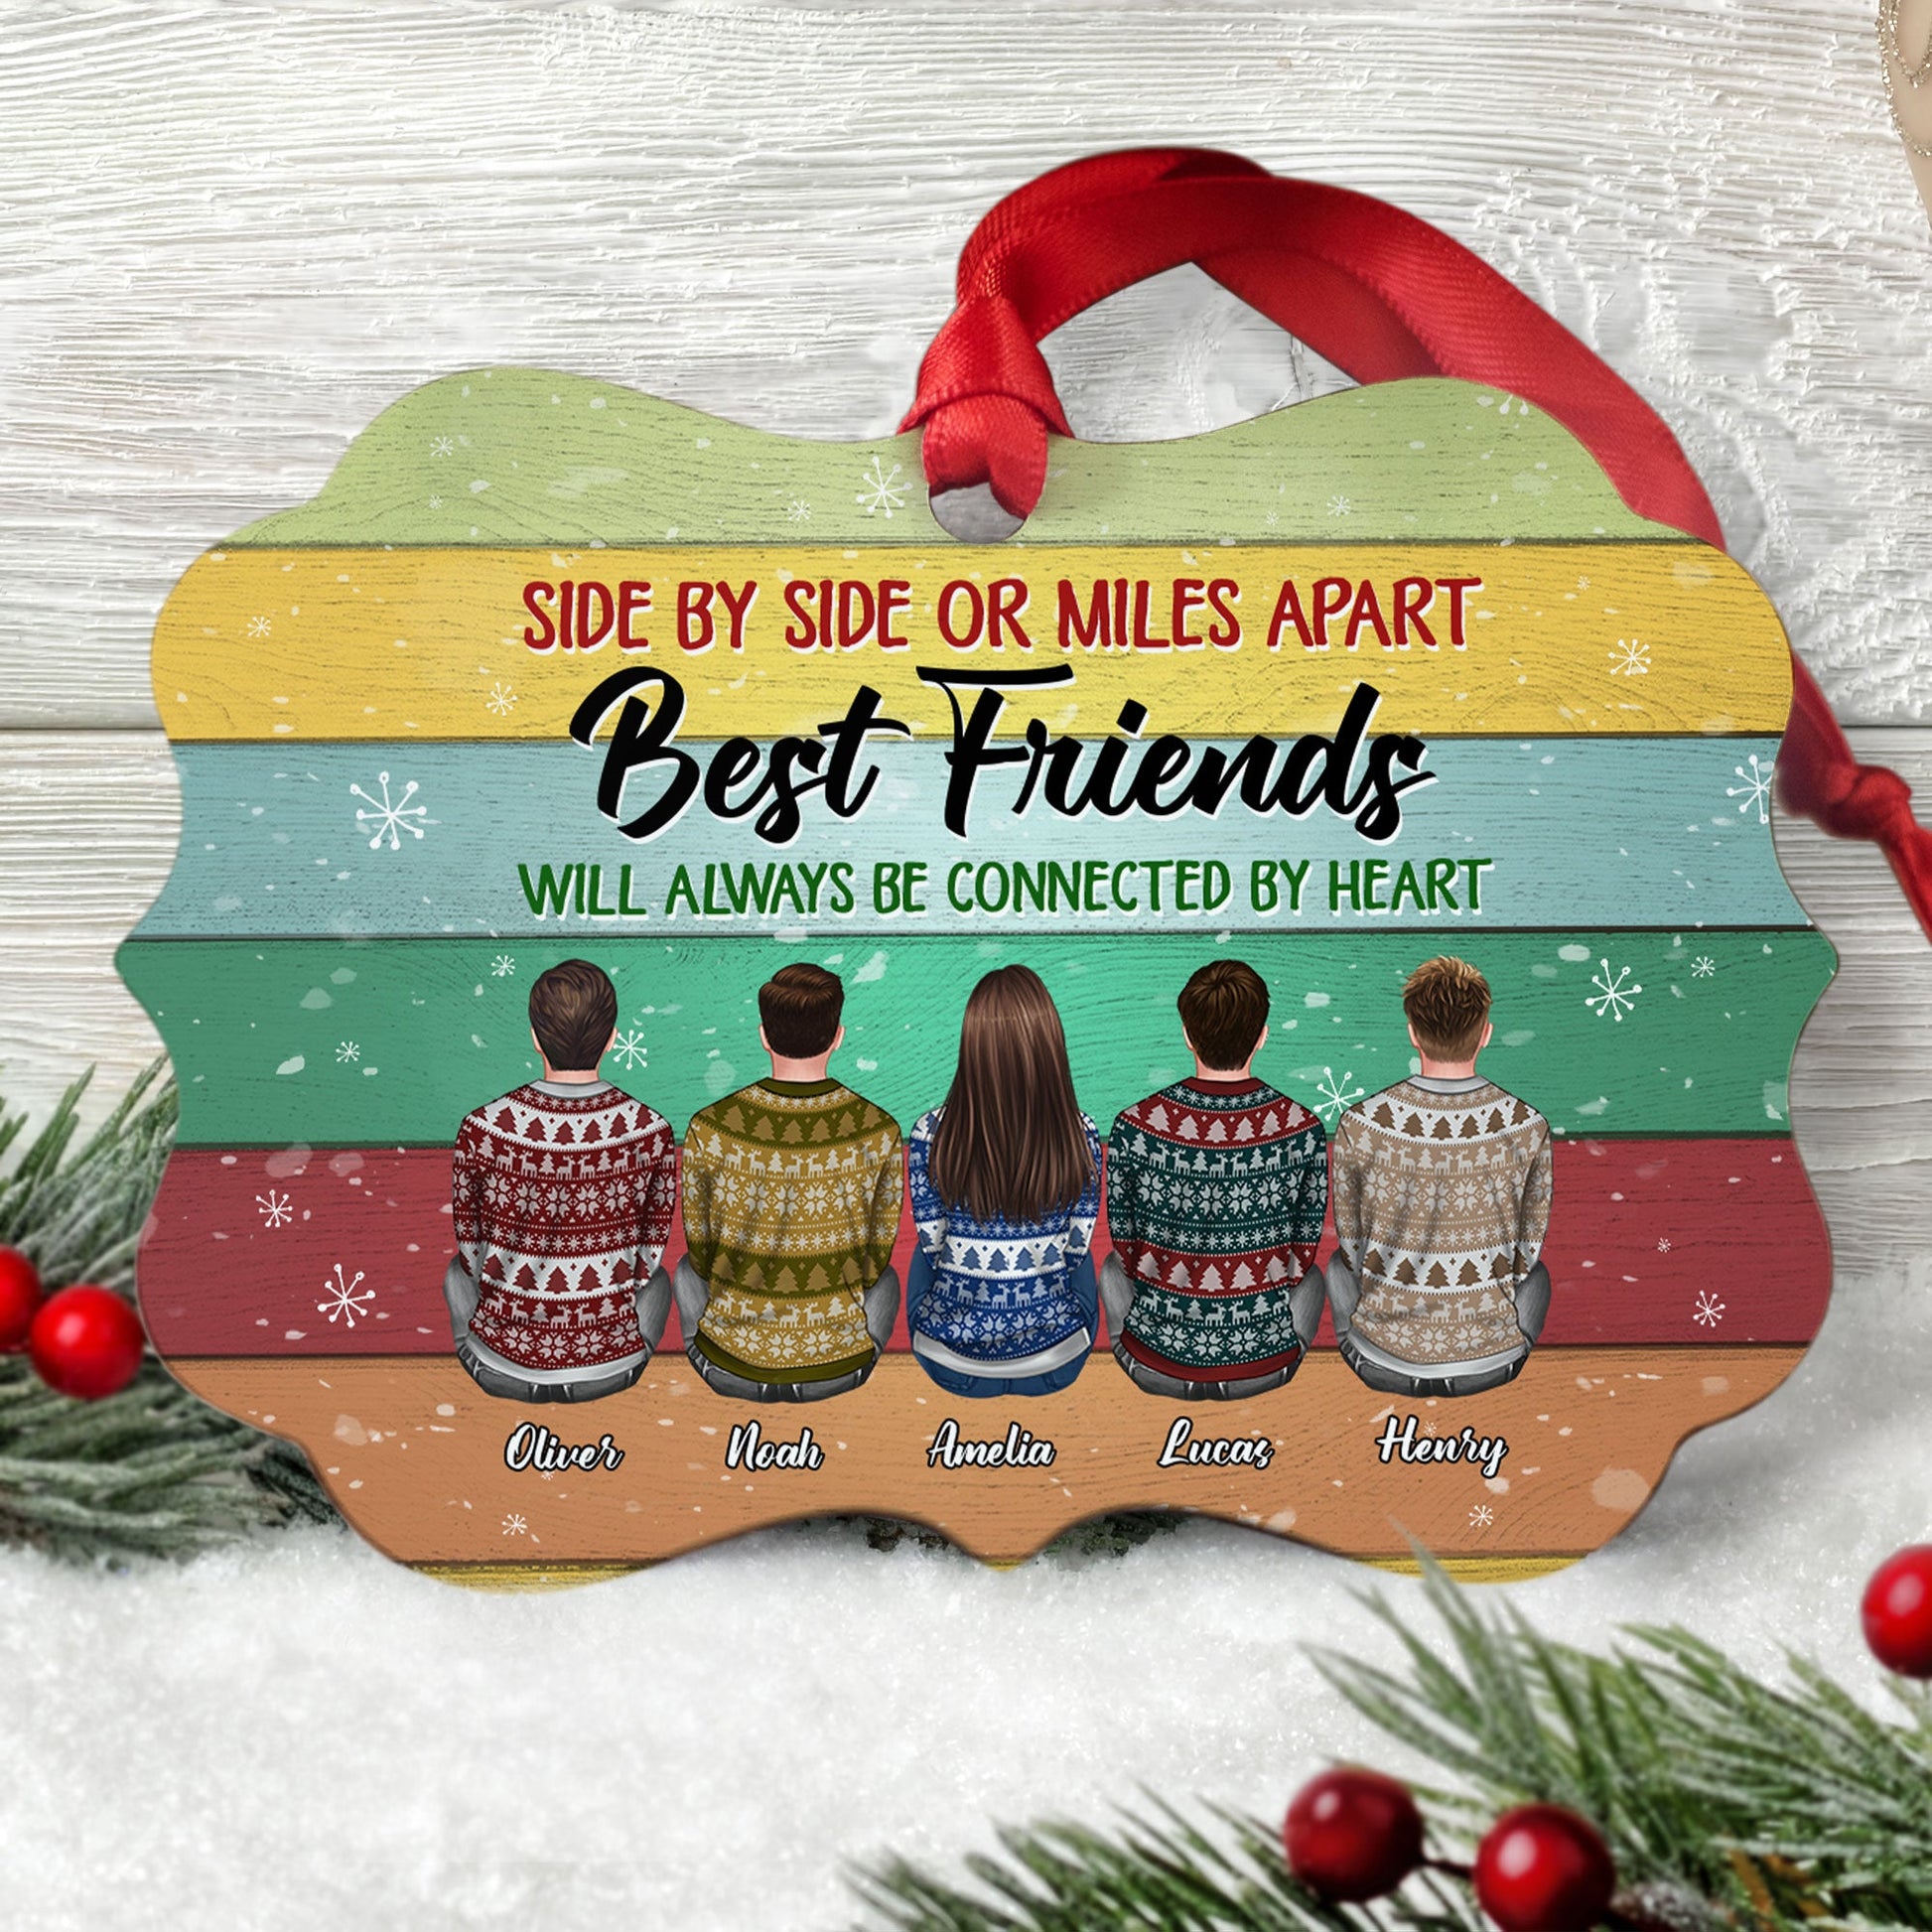 Good Gifts for Friends at Christmas – Fun-Squared